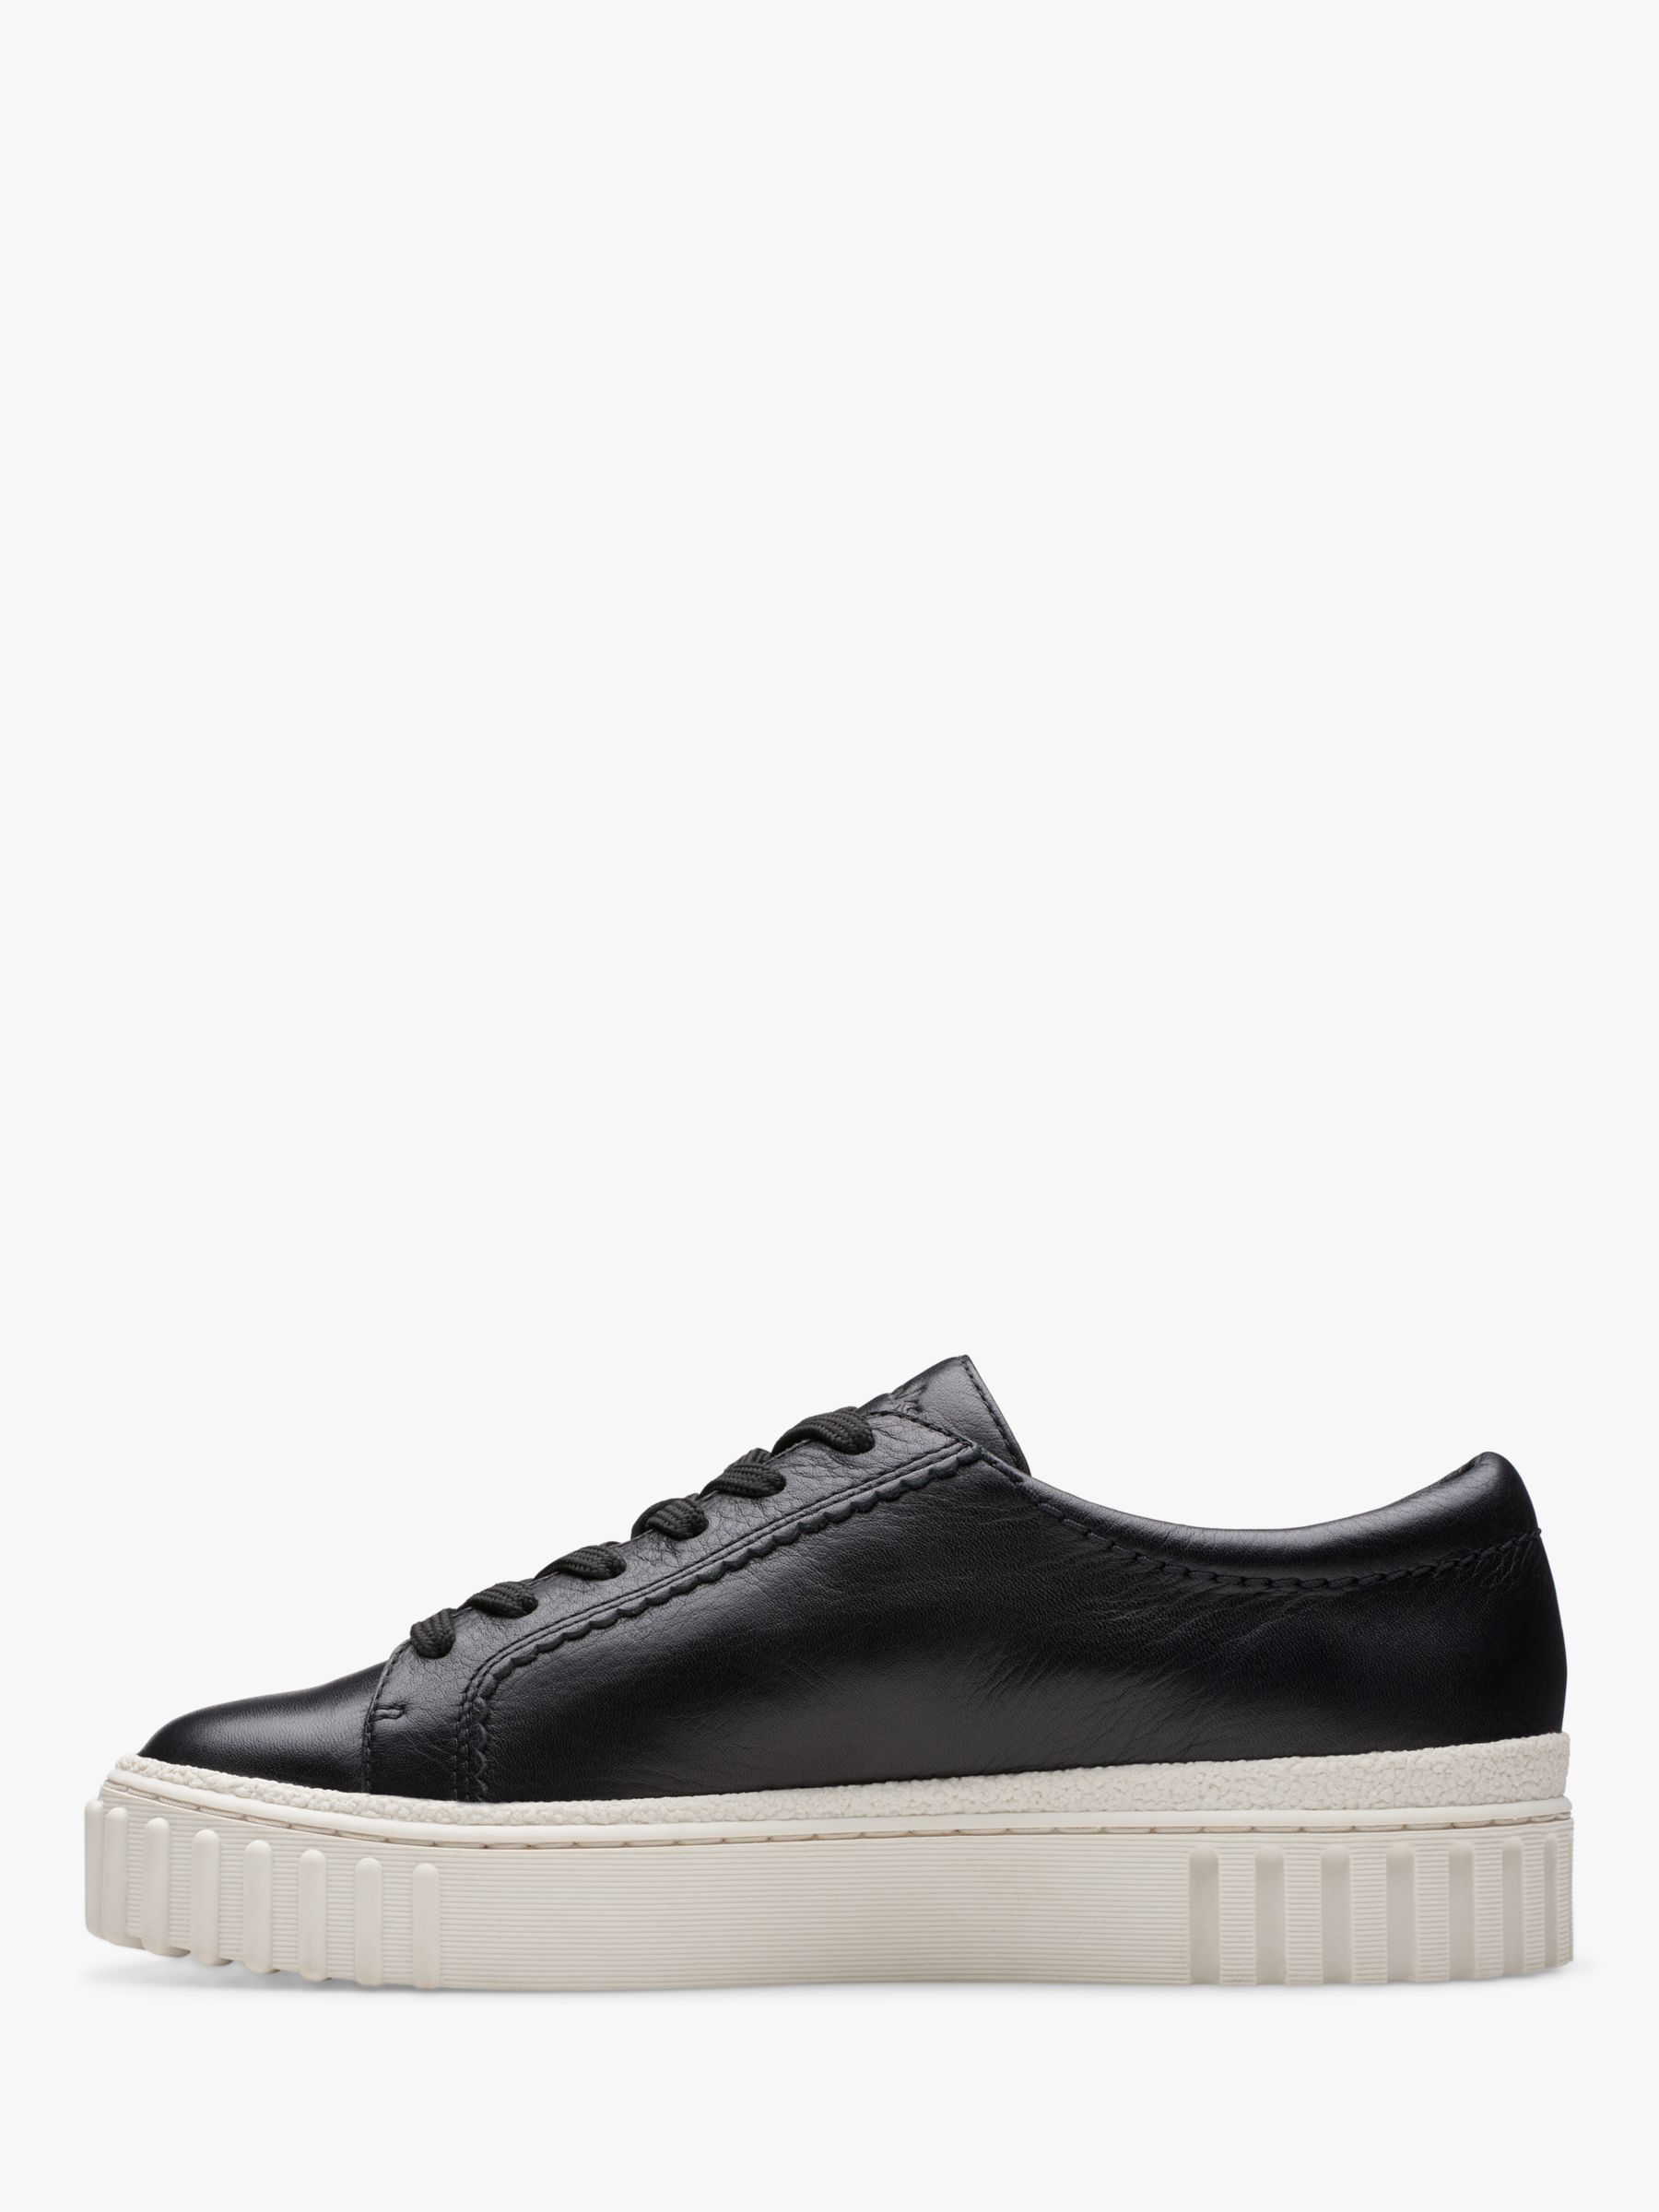 Buy Clarks Mayhill Walk Leather Trainers, Black Online at johnlewis.com